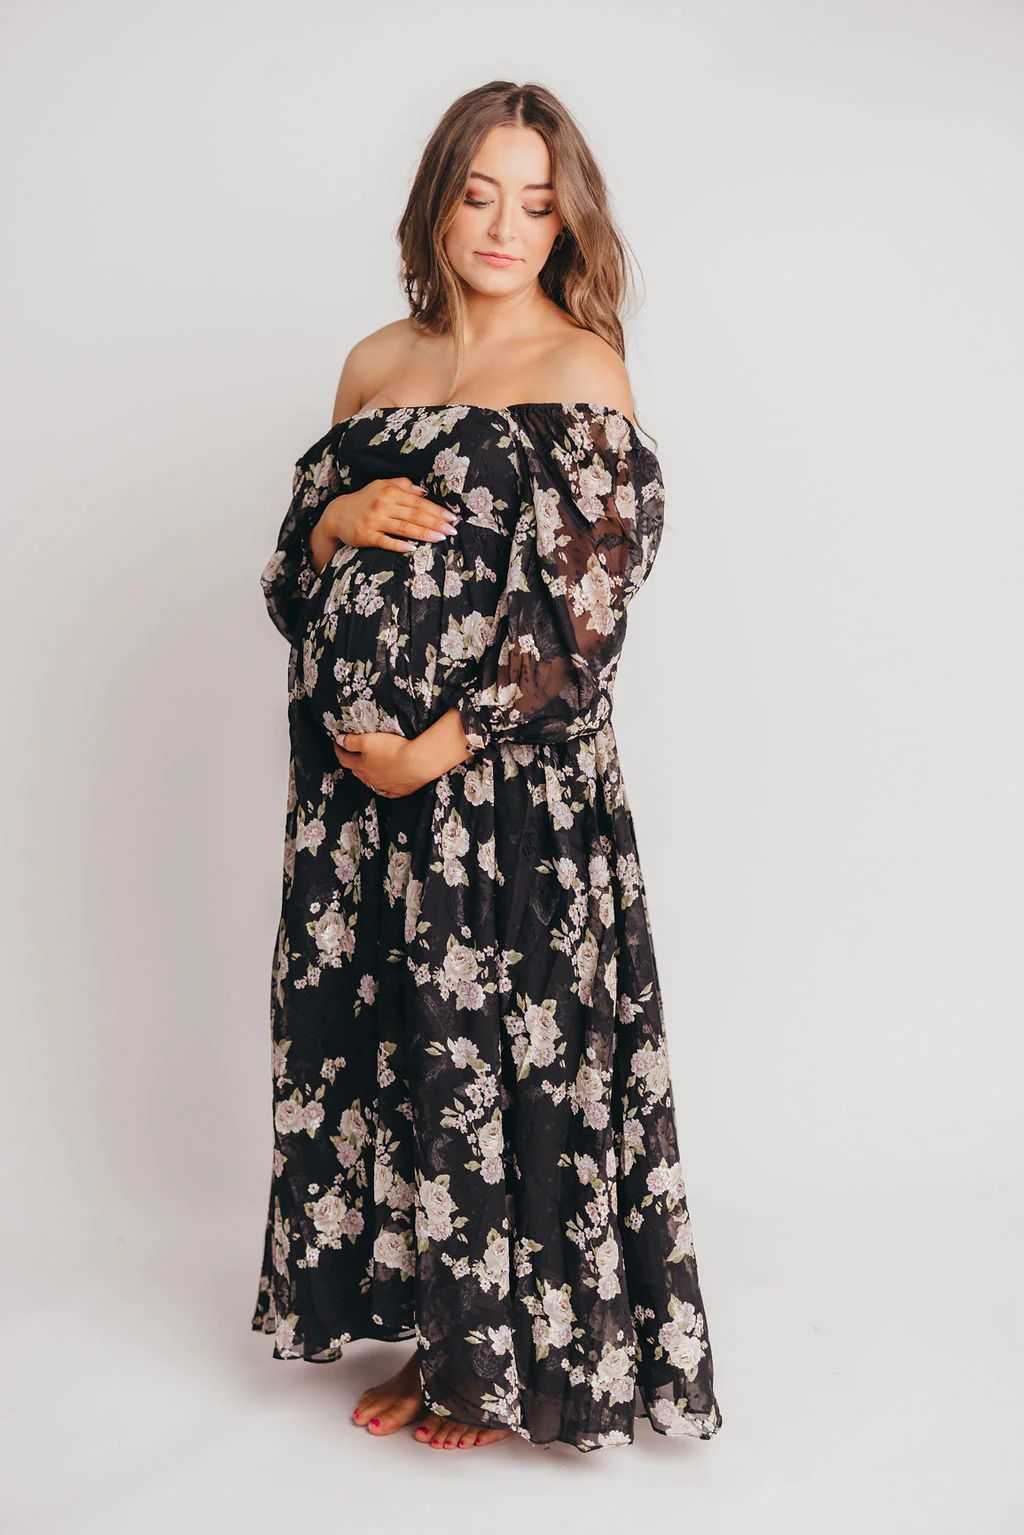 Mona Maxi Dress in Black/Beige Floral - Bump Friendly | Worth Collective